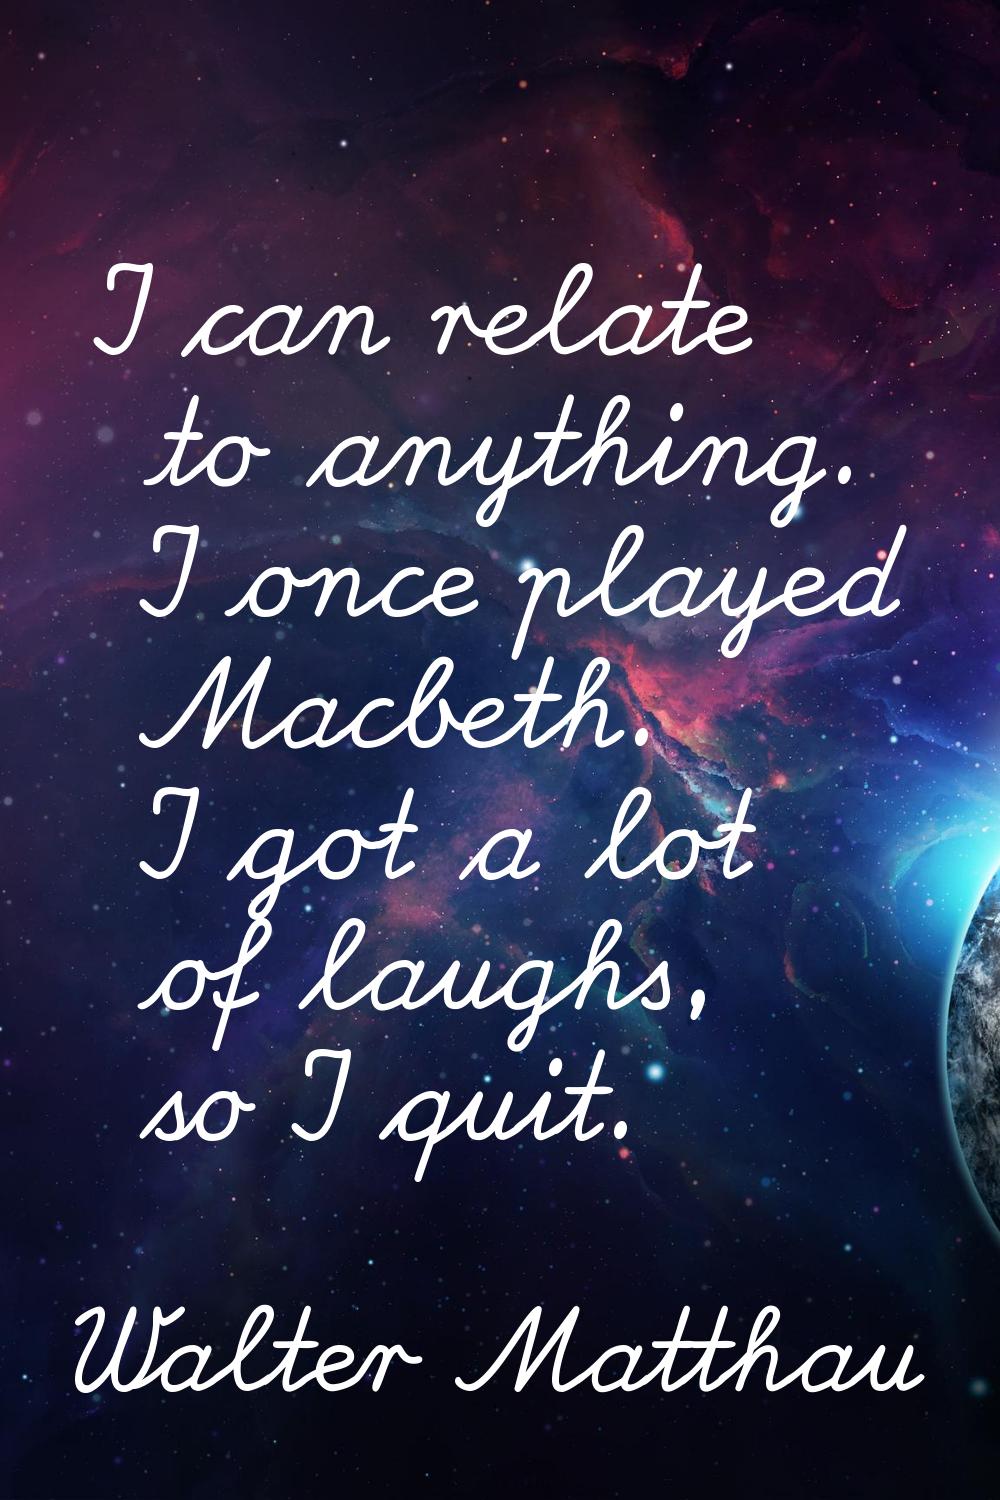 I can relate to anything. I once played Macbeth. I got a lot of laughs, so I quit.